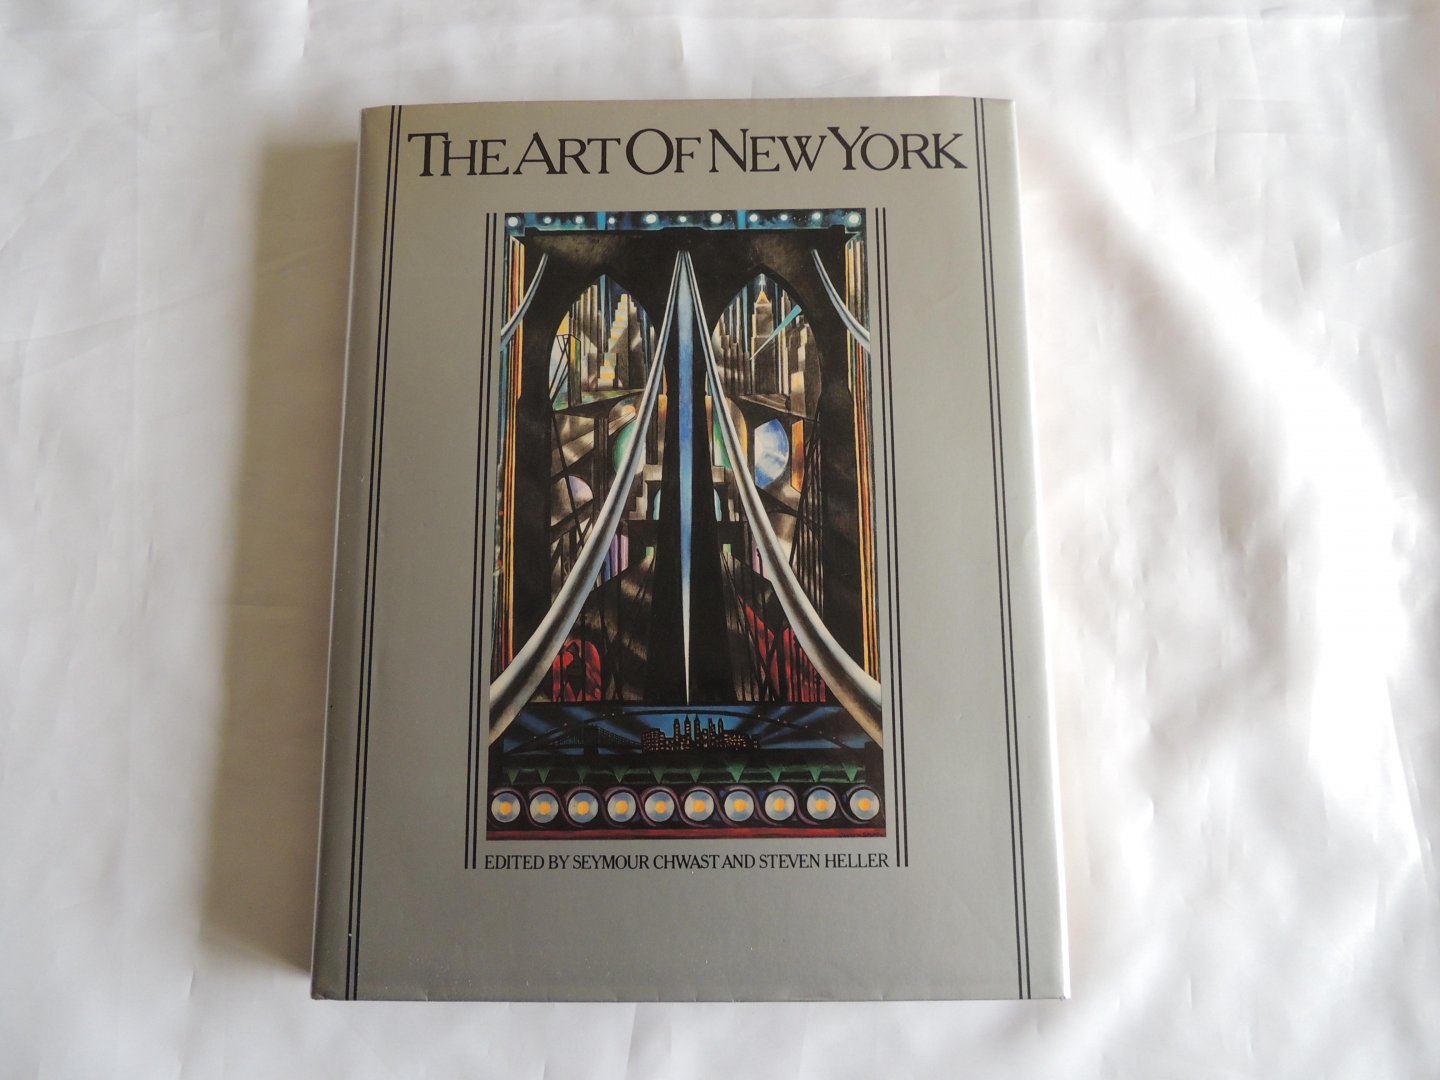 Chwast, Seymour and Steven Heller - The Art of New York